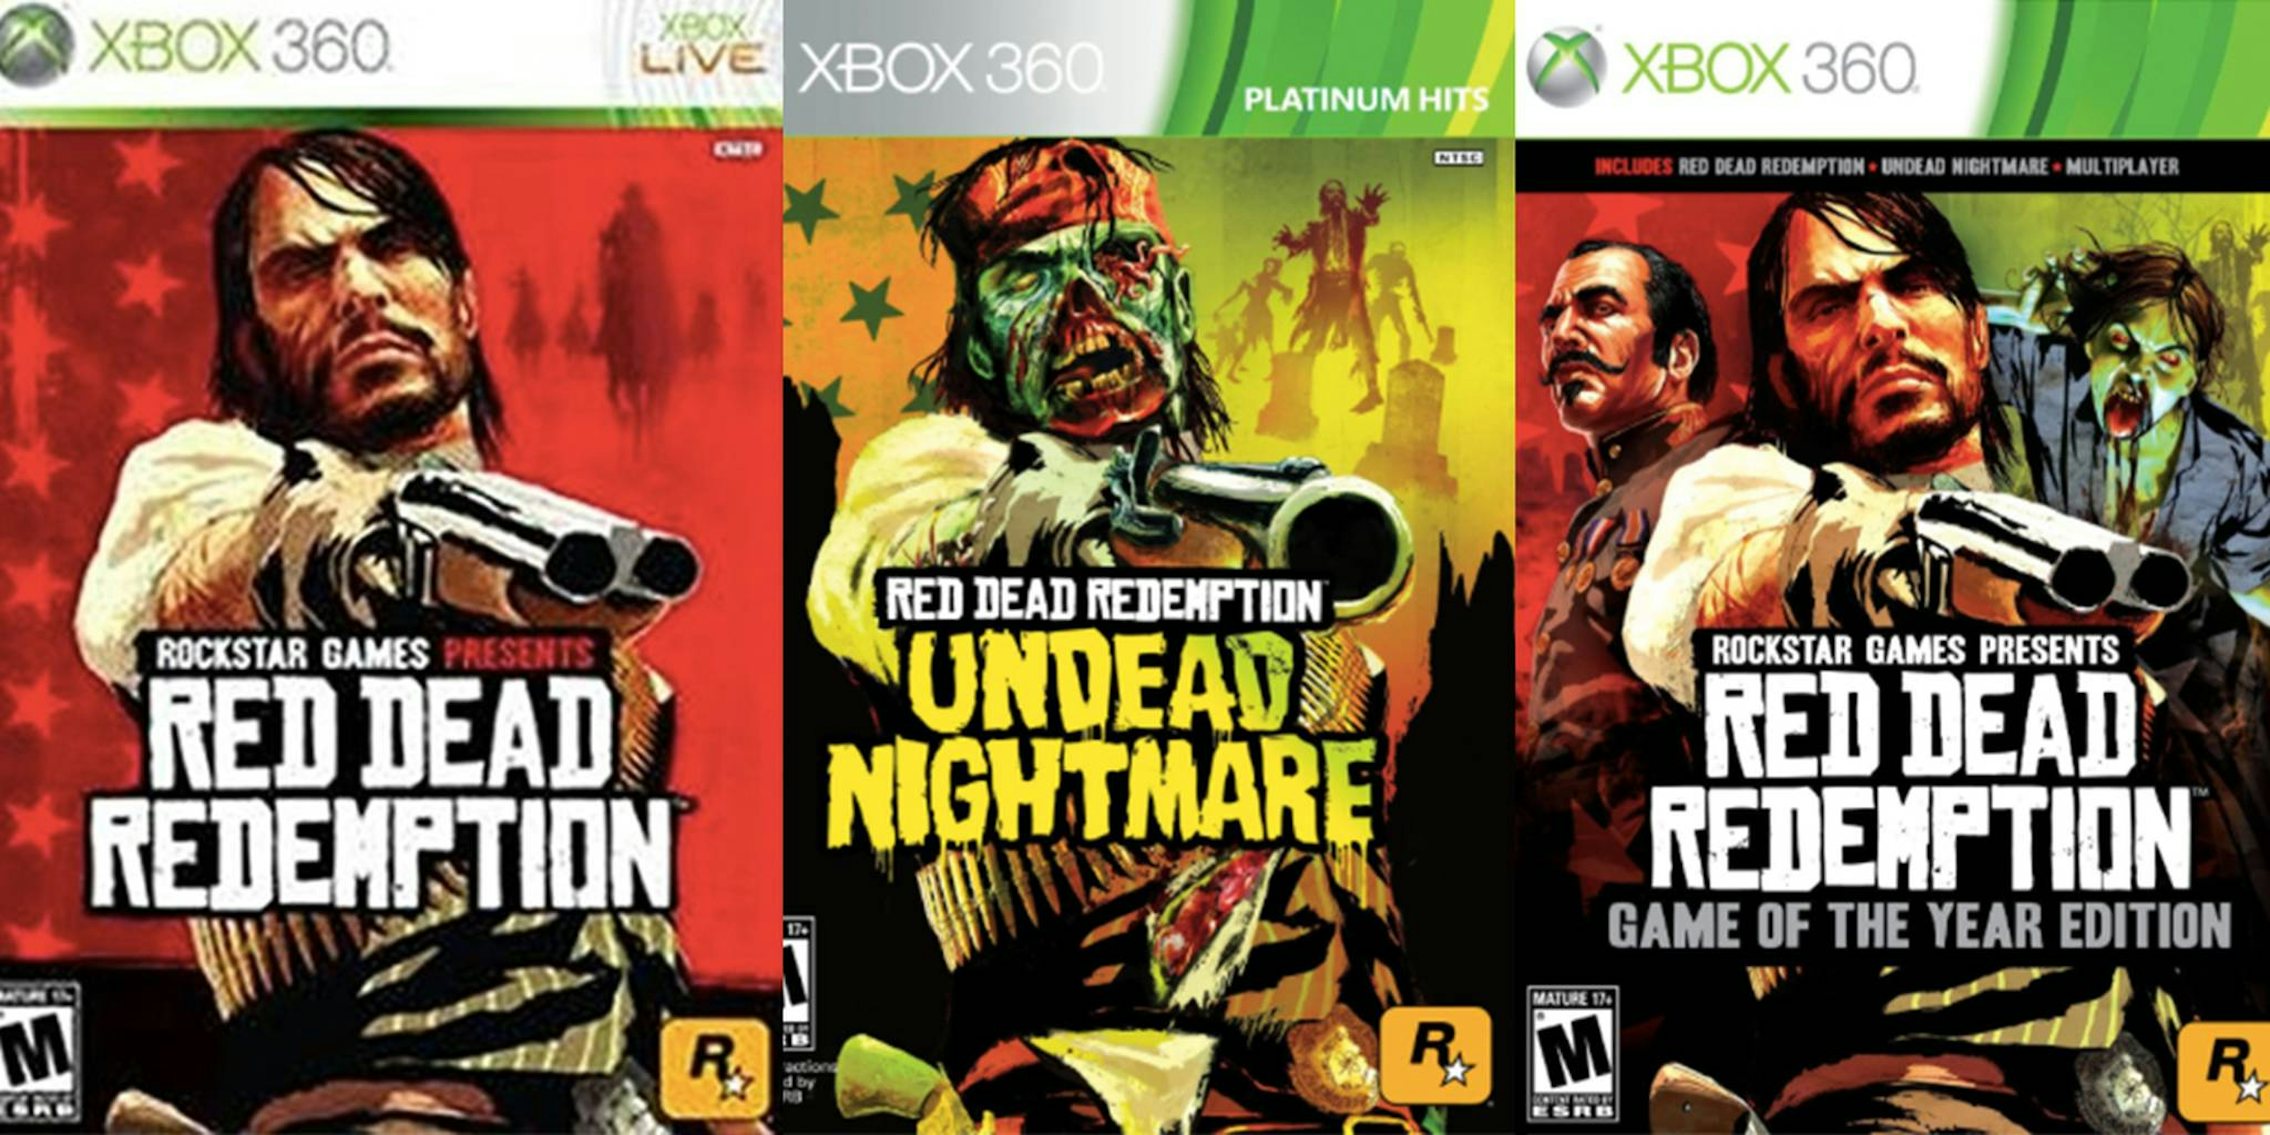 Игра на xbox red dead redemption. Red Dead Redemption диск Xbox 360. Rdr 1 Xbox 360. Red Dead Redemption 2 Xbox диск. Игра на Xbox 360 Red Dead Redemption.